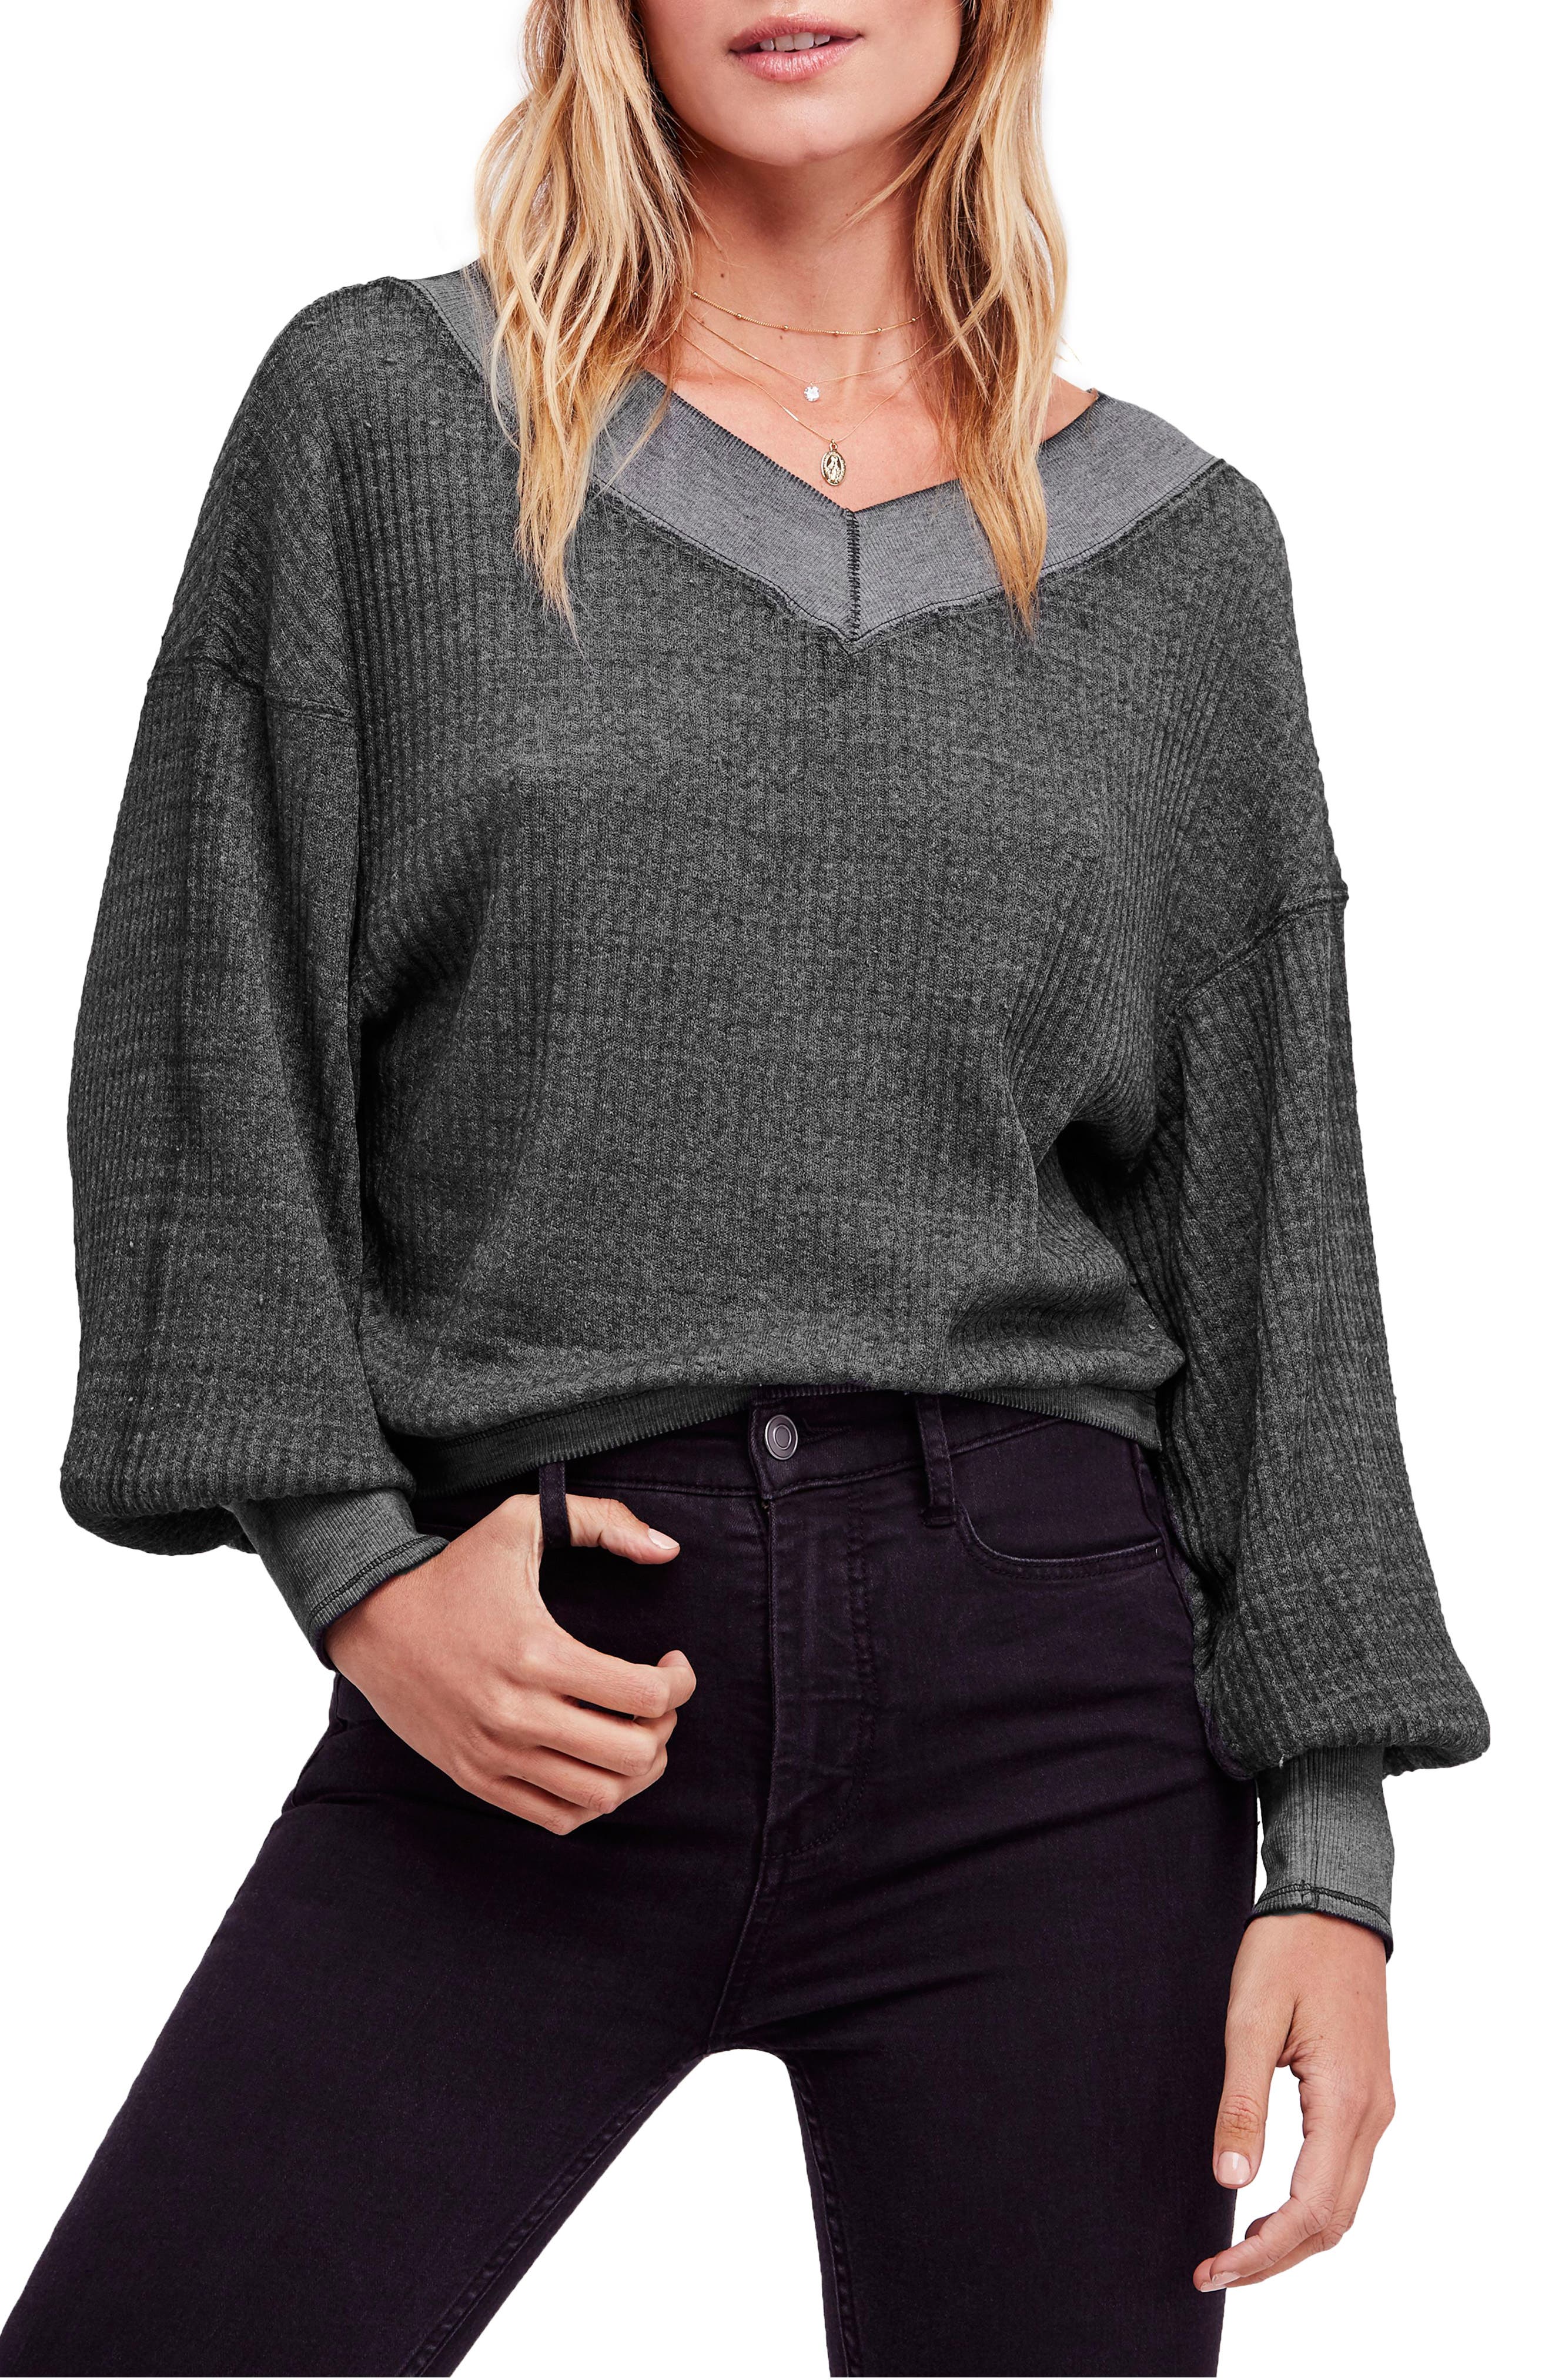 free people south side thermal top